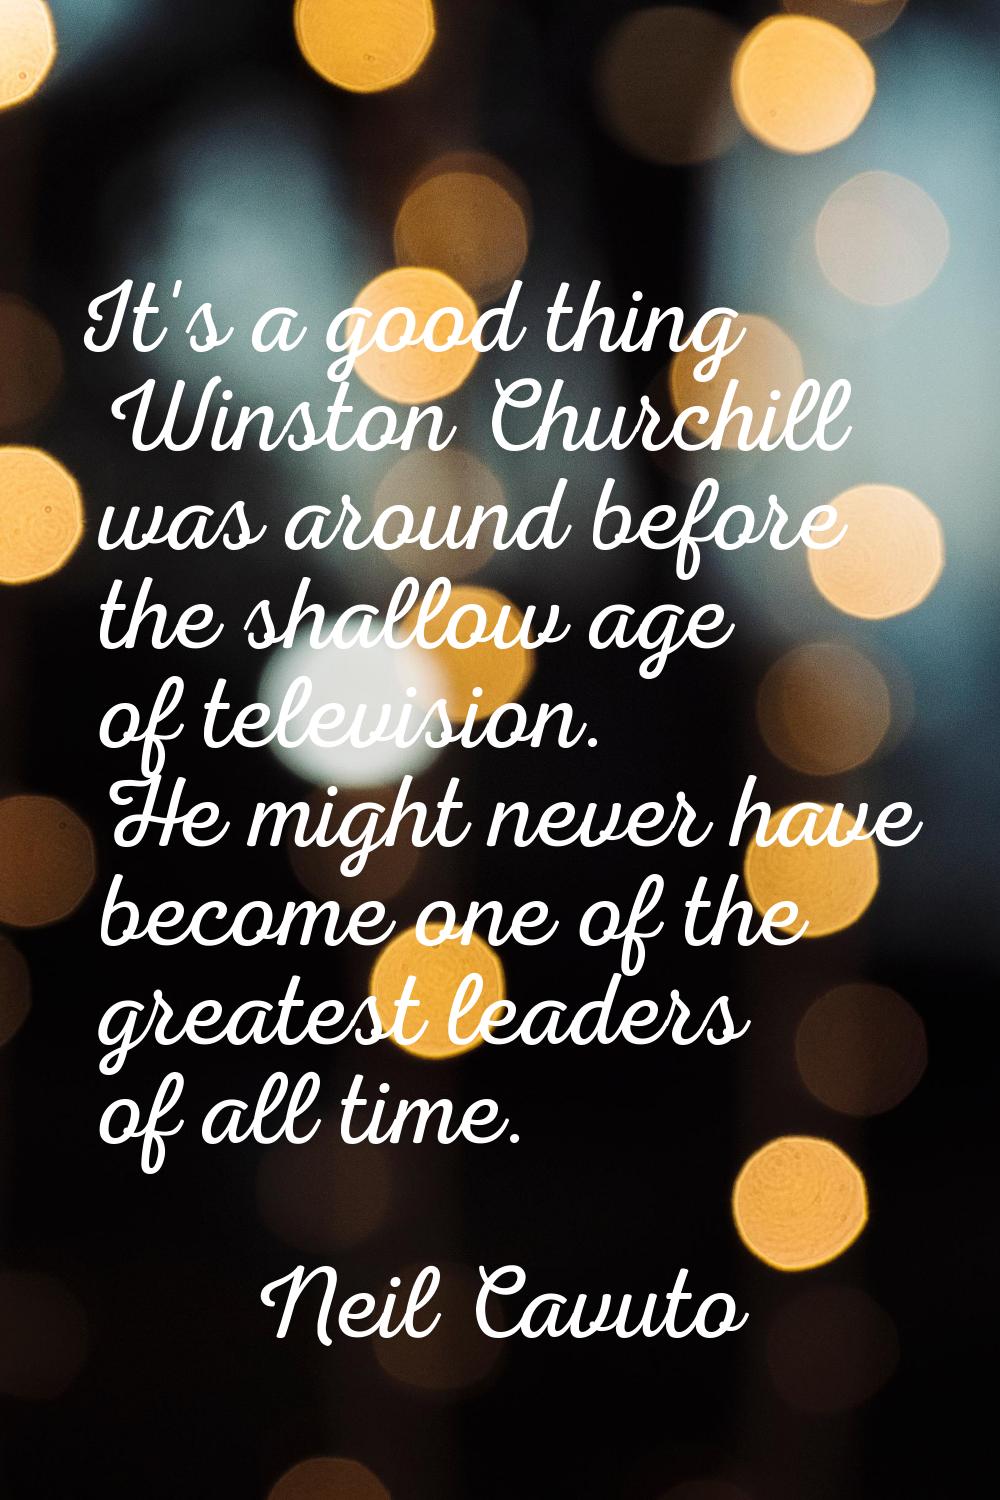 It's a good thing Winston Churchill was around before the shallow age of television. He might never